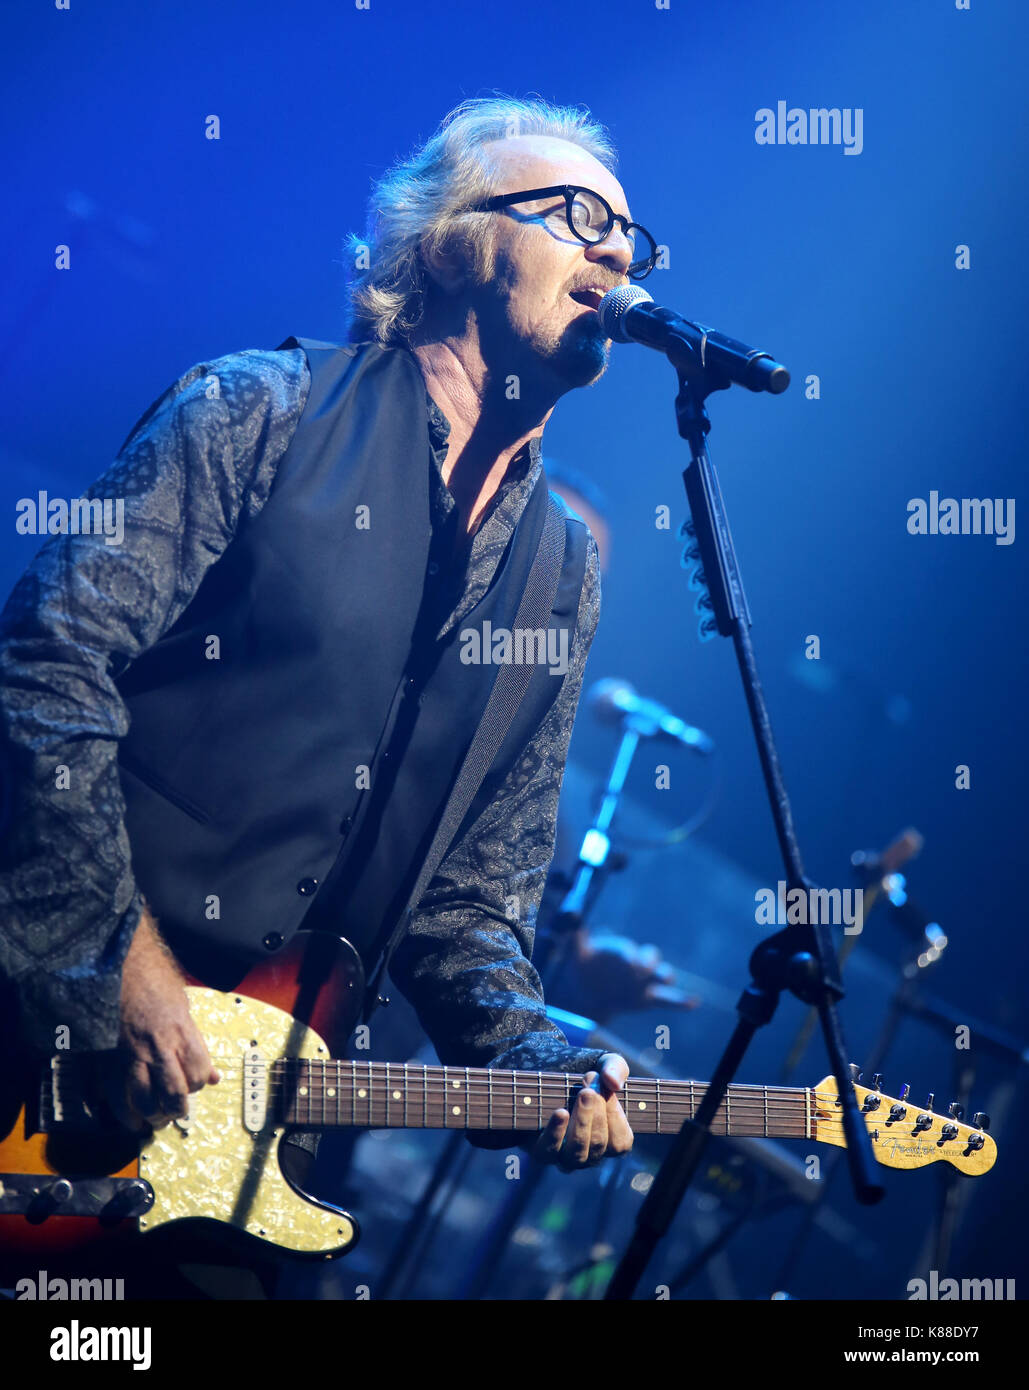 Padova, PD, Italy - May 19, 2017: Live Concert indoor of Umberto Tozzi an Italian pop and rock singer and composer Stock Photo